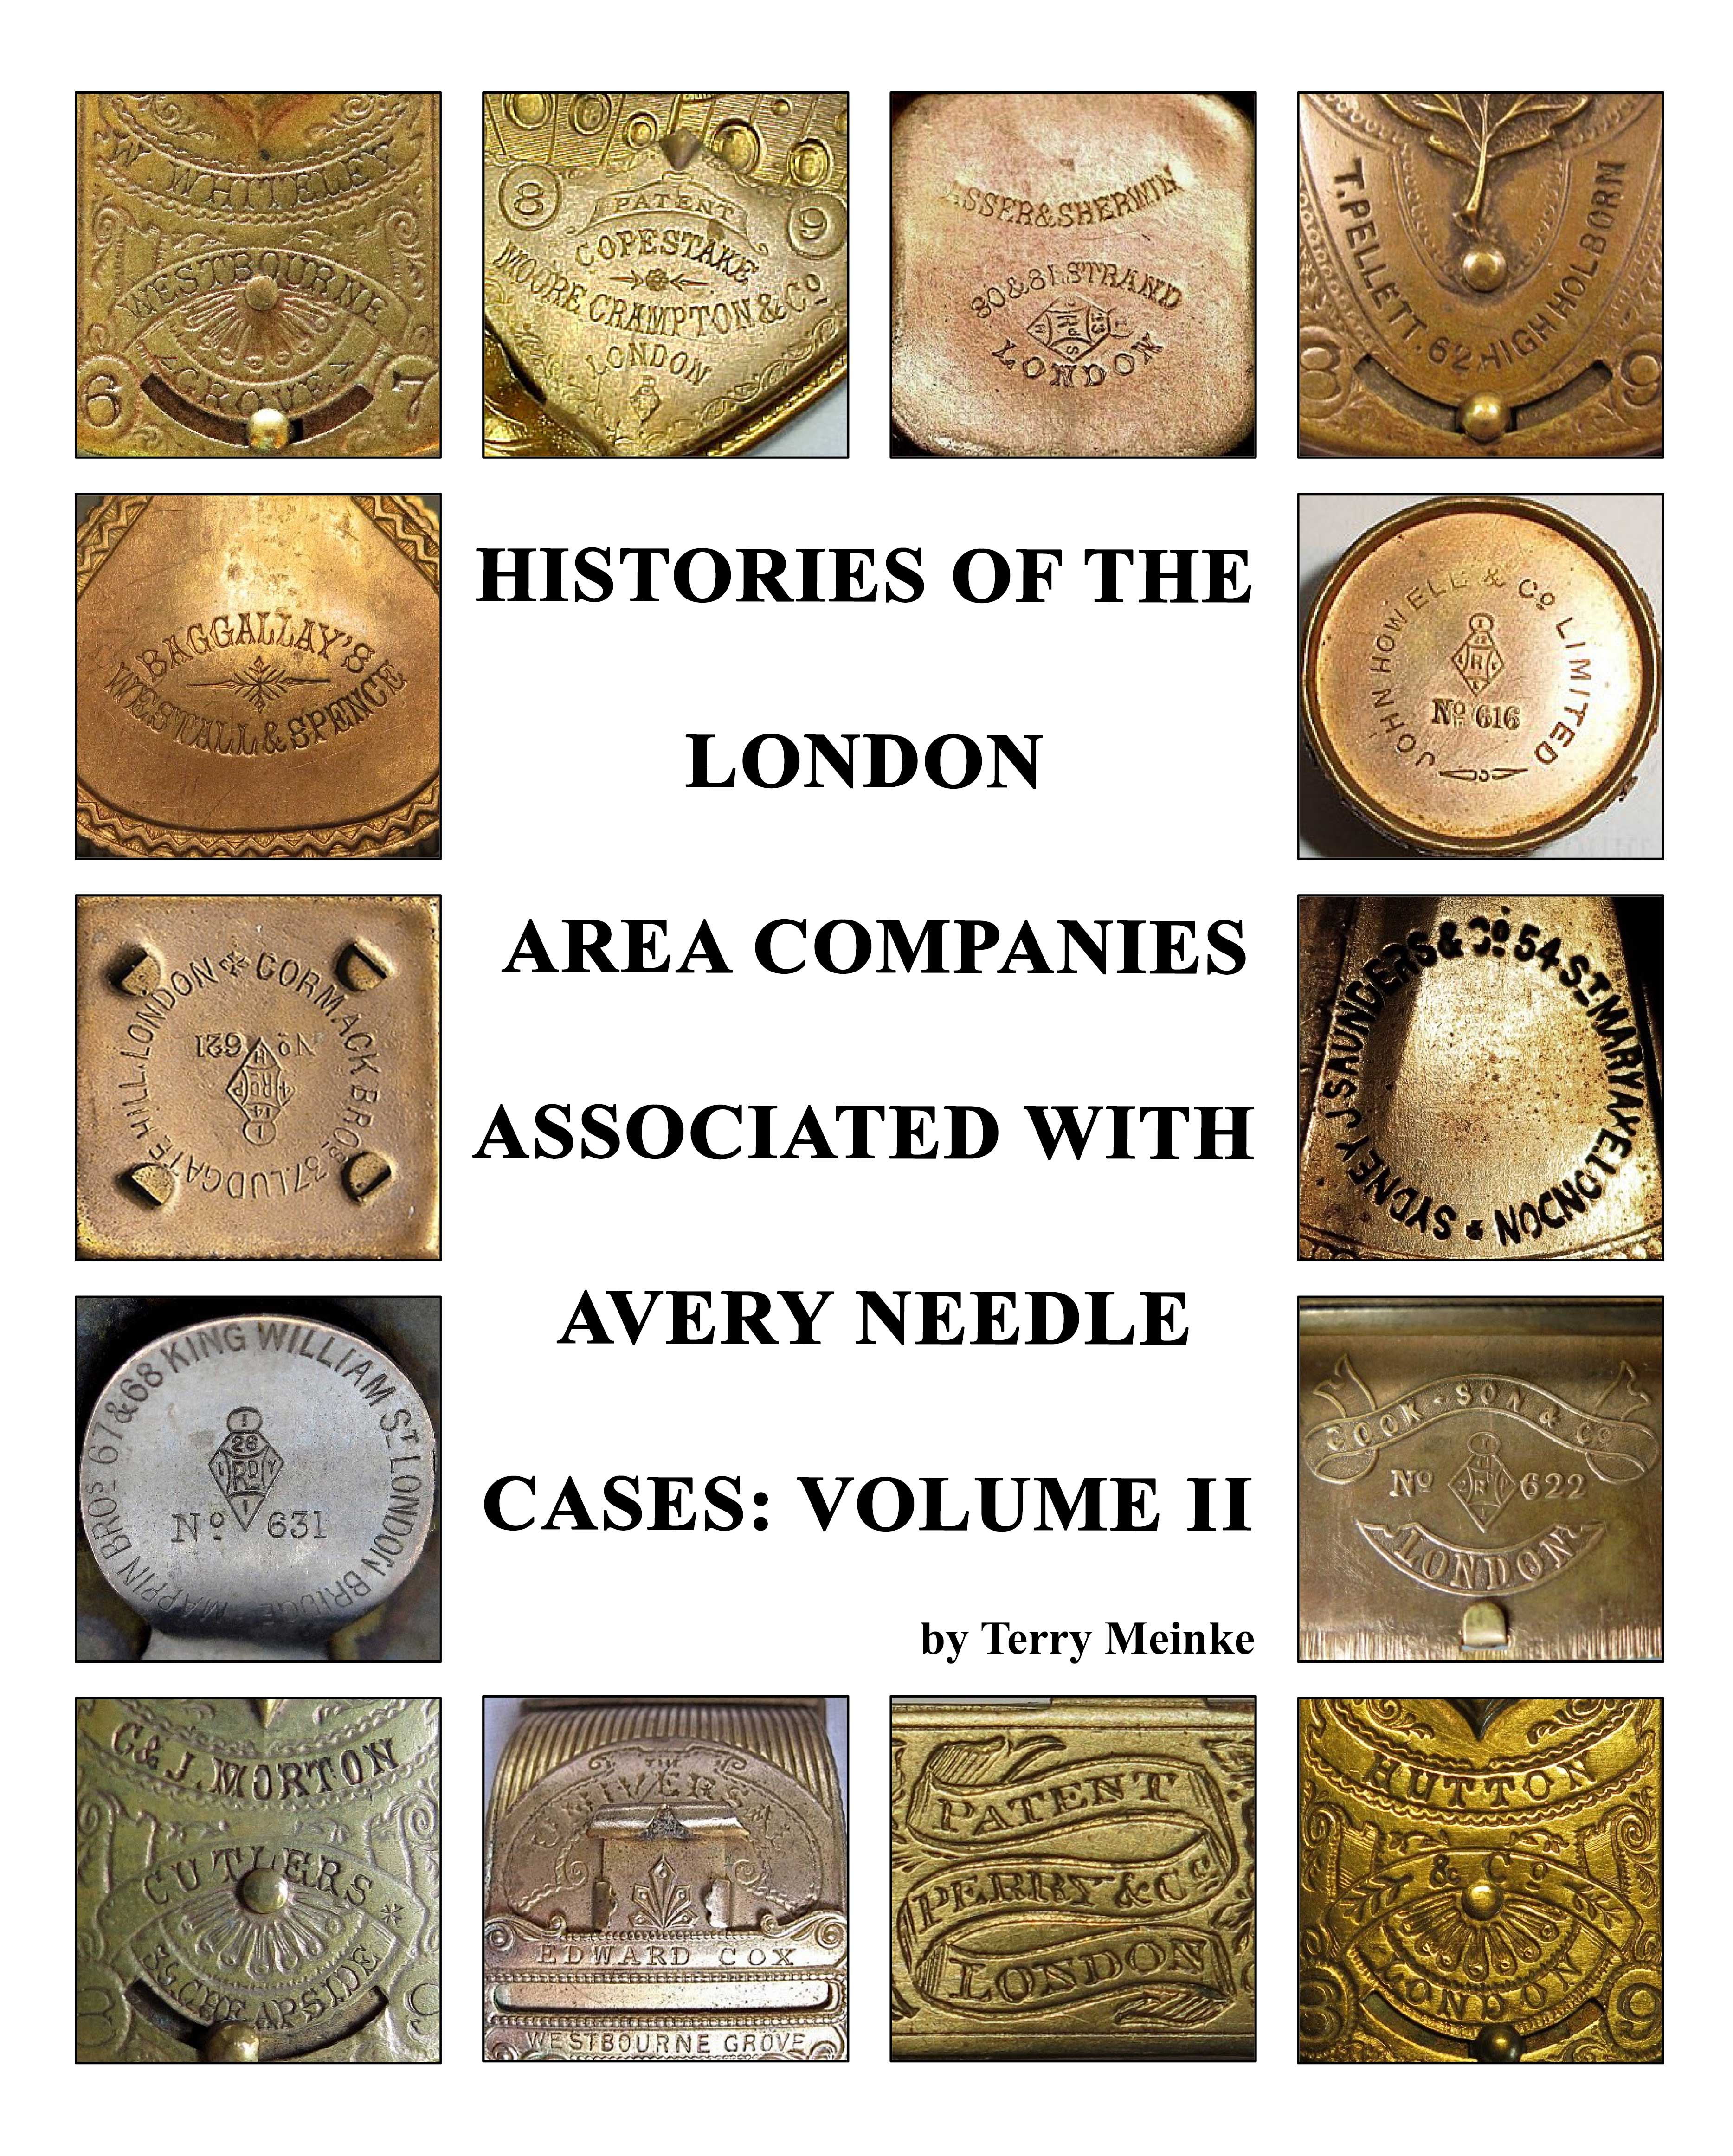 Histories of the London Area Companies Associated with Avery Needle Cases